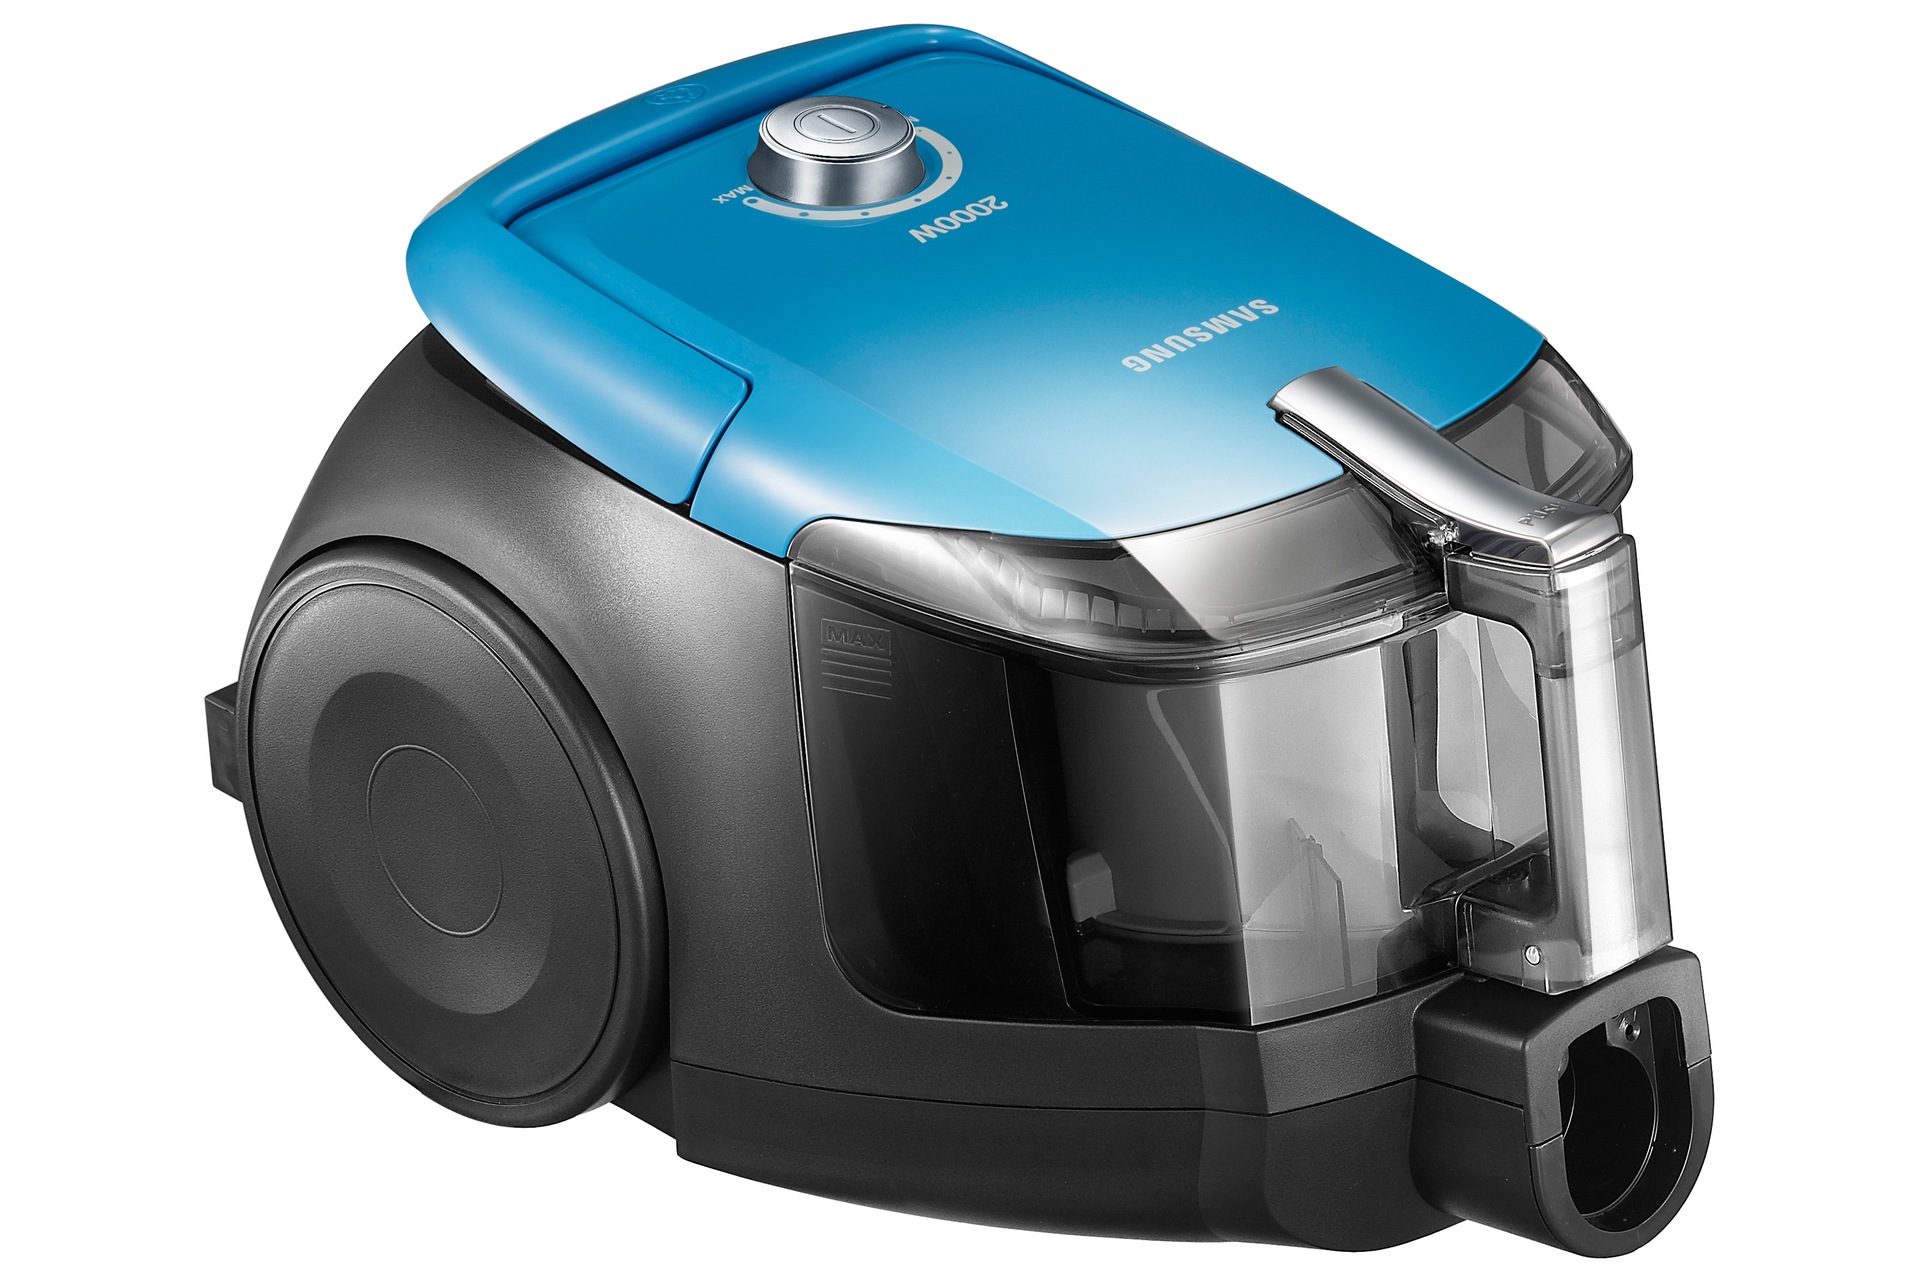 How to care for Samsung Vacuum Cleaner?